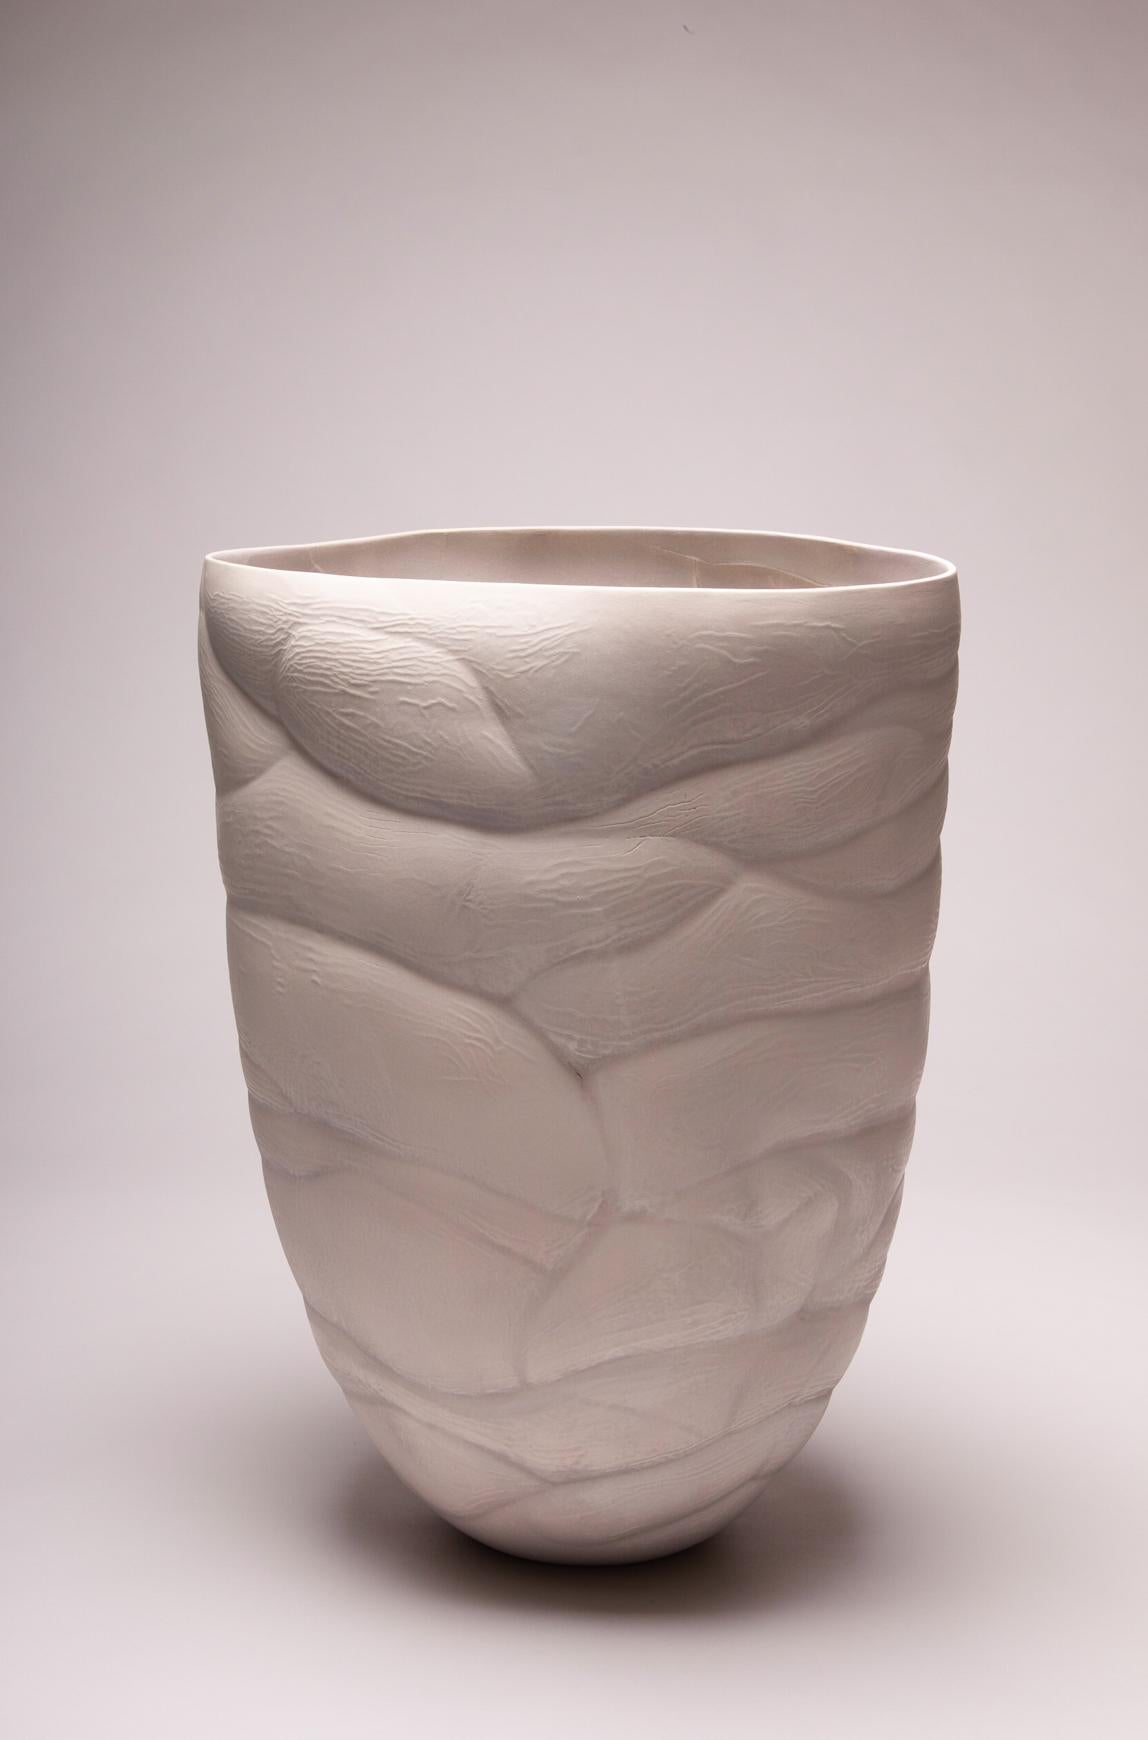 In her lakeside studio surrounded by nature, Paula Murray creates uniquely beautiful porcelain pieces. This creamy white vessel has a tall undulating form. Wave-like patterns that run both outside and inside the piece accentuate its elegant